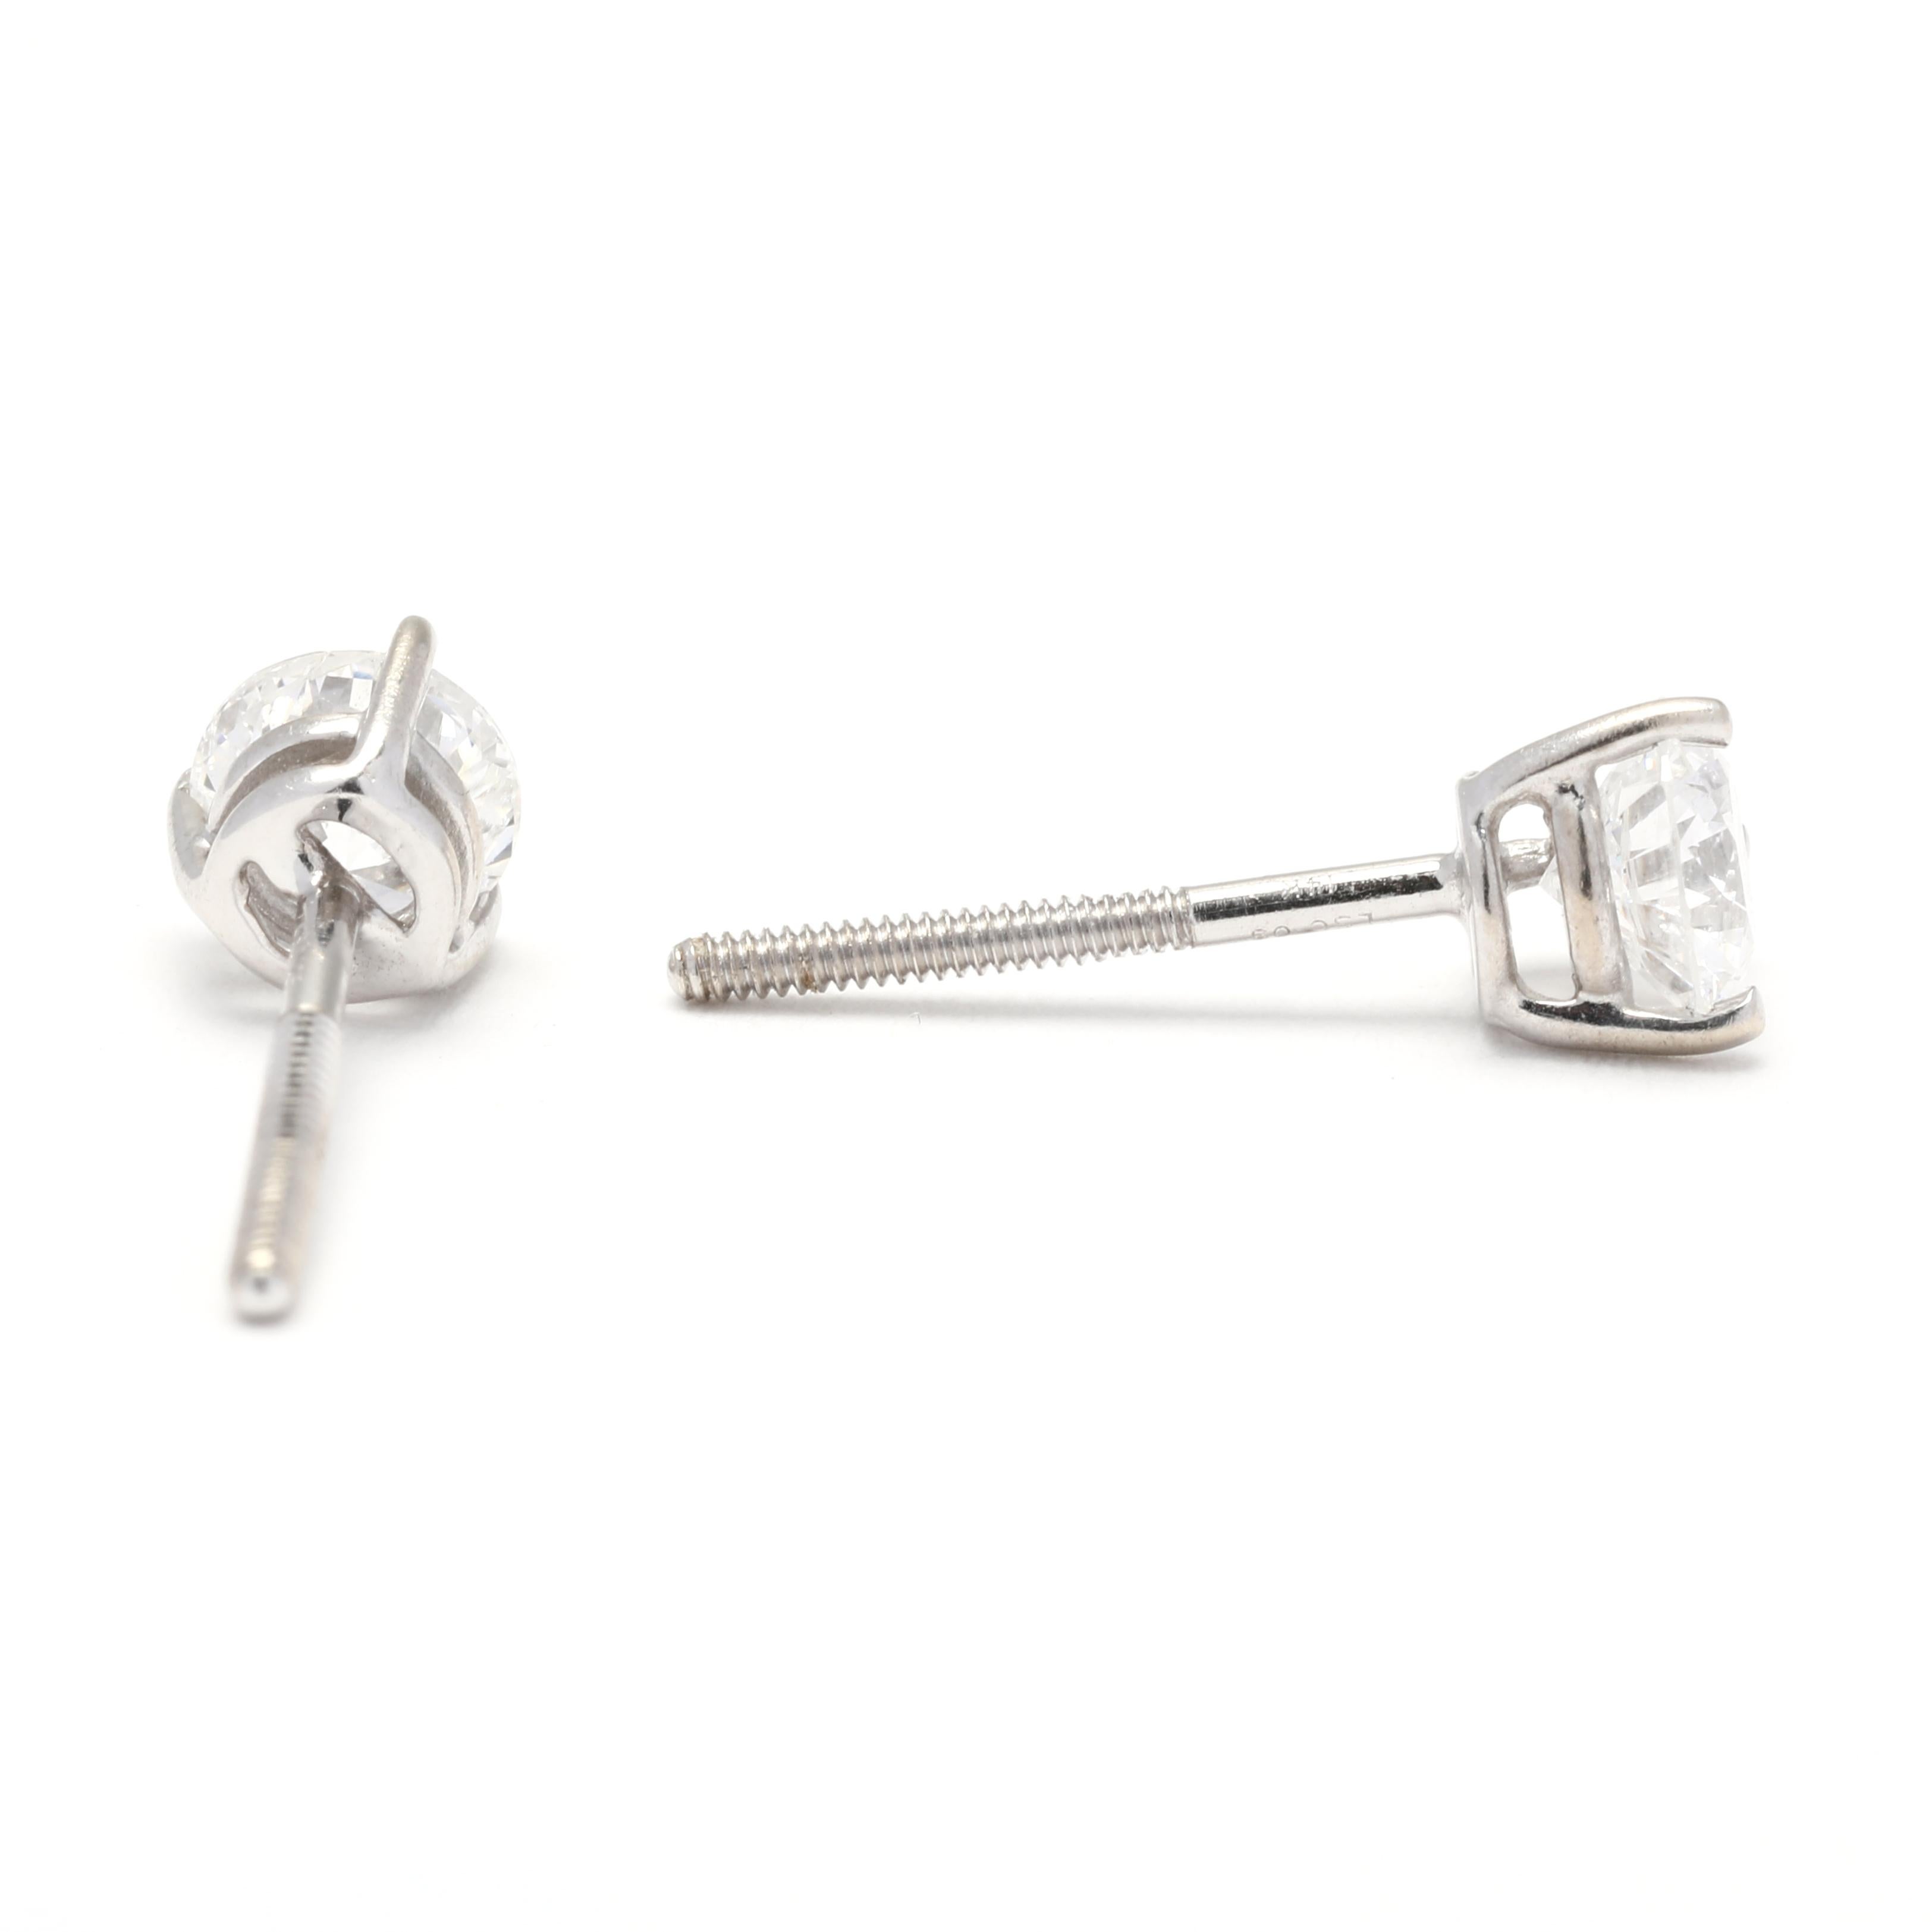 Each earring features a round-cut diamond with a total carat weight of 0.75ctw. The diamonds are hand-selected for their exceptional clarity and sparkle, and they are securely set in a classic four-prong setting. The 14K white gold setting enhances